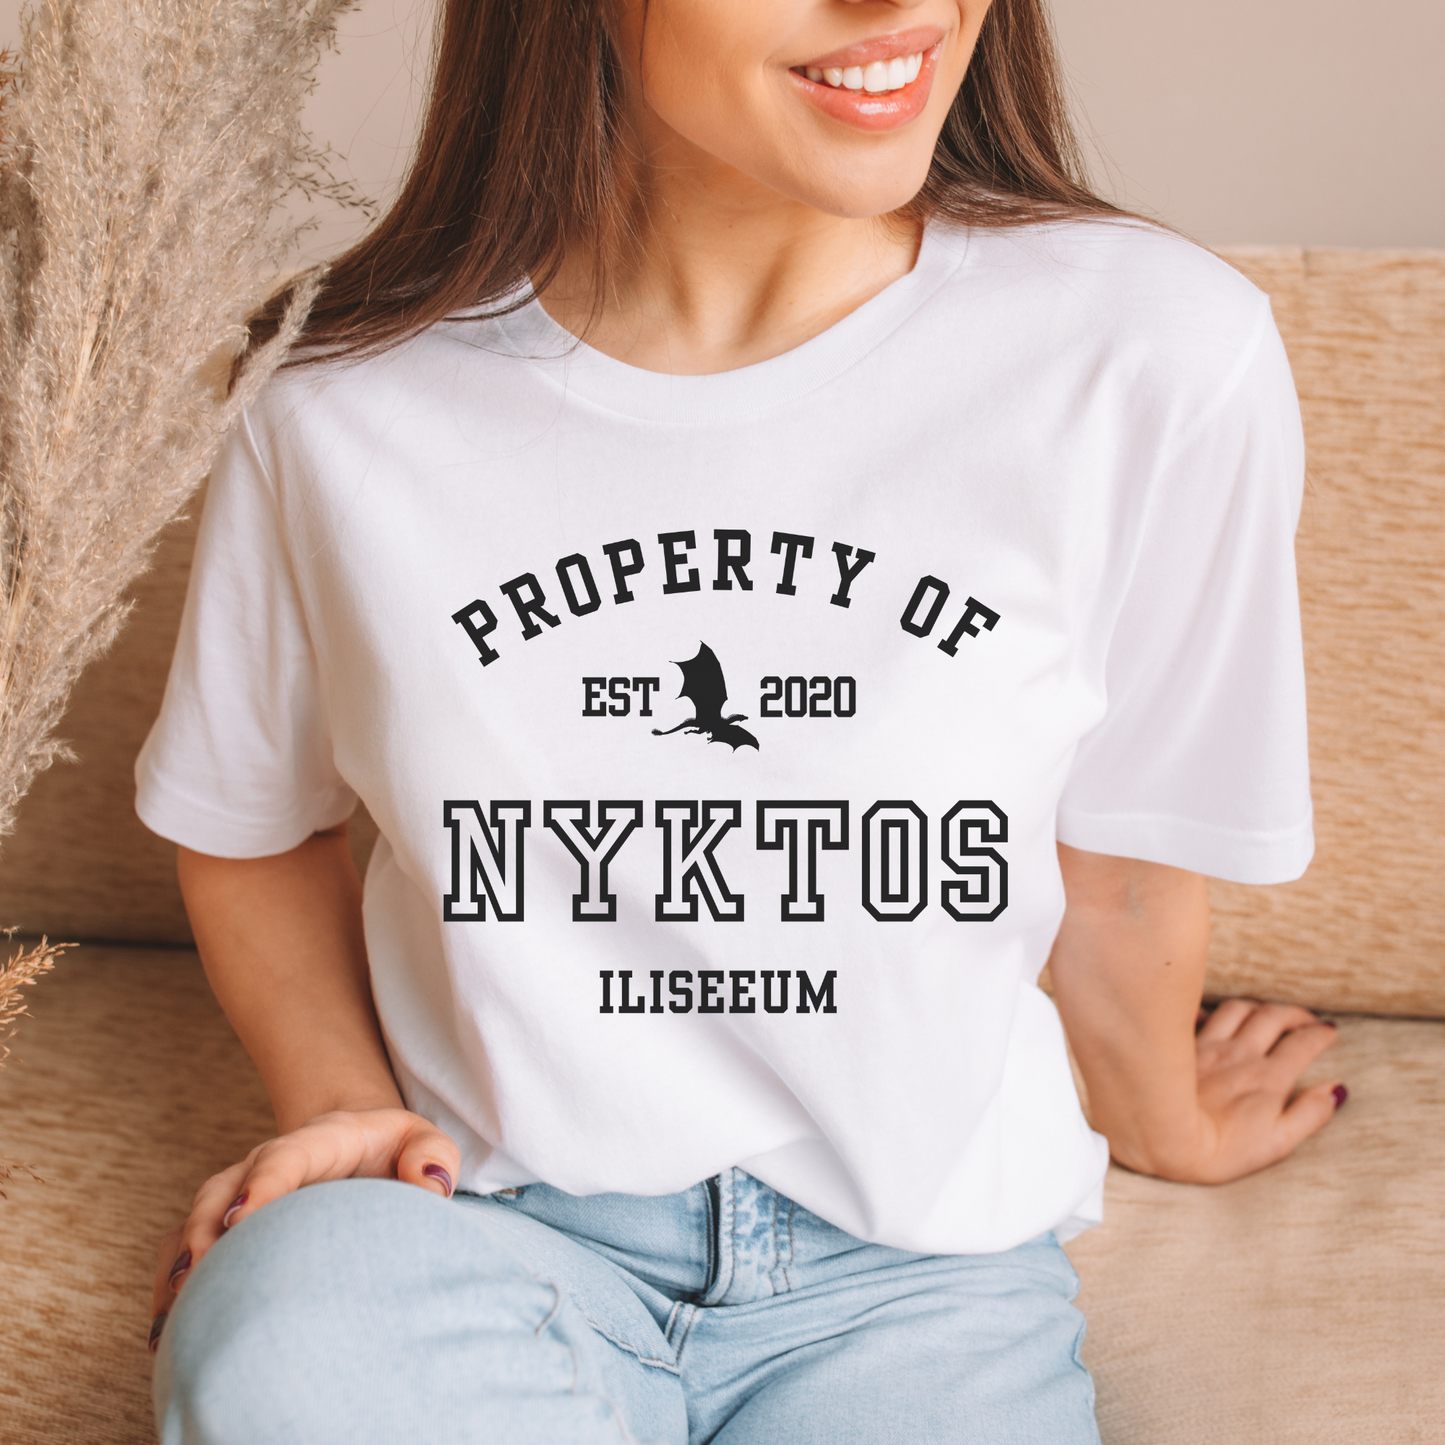 A Shadow In The Ember Property Of Nyktos Collegiate Tshirt Iliseeum JLA ASITE ALITF Merch Classic Unisex Crewneck White T-shirt